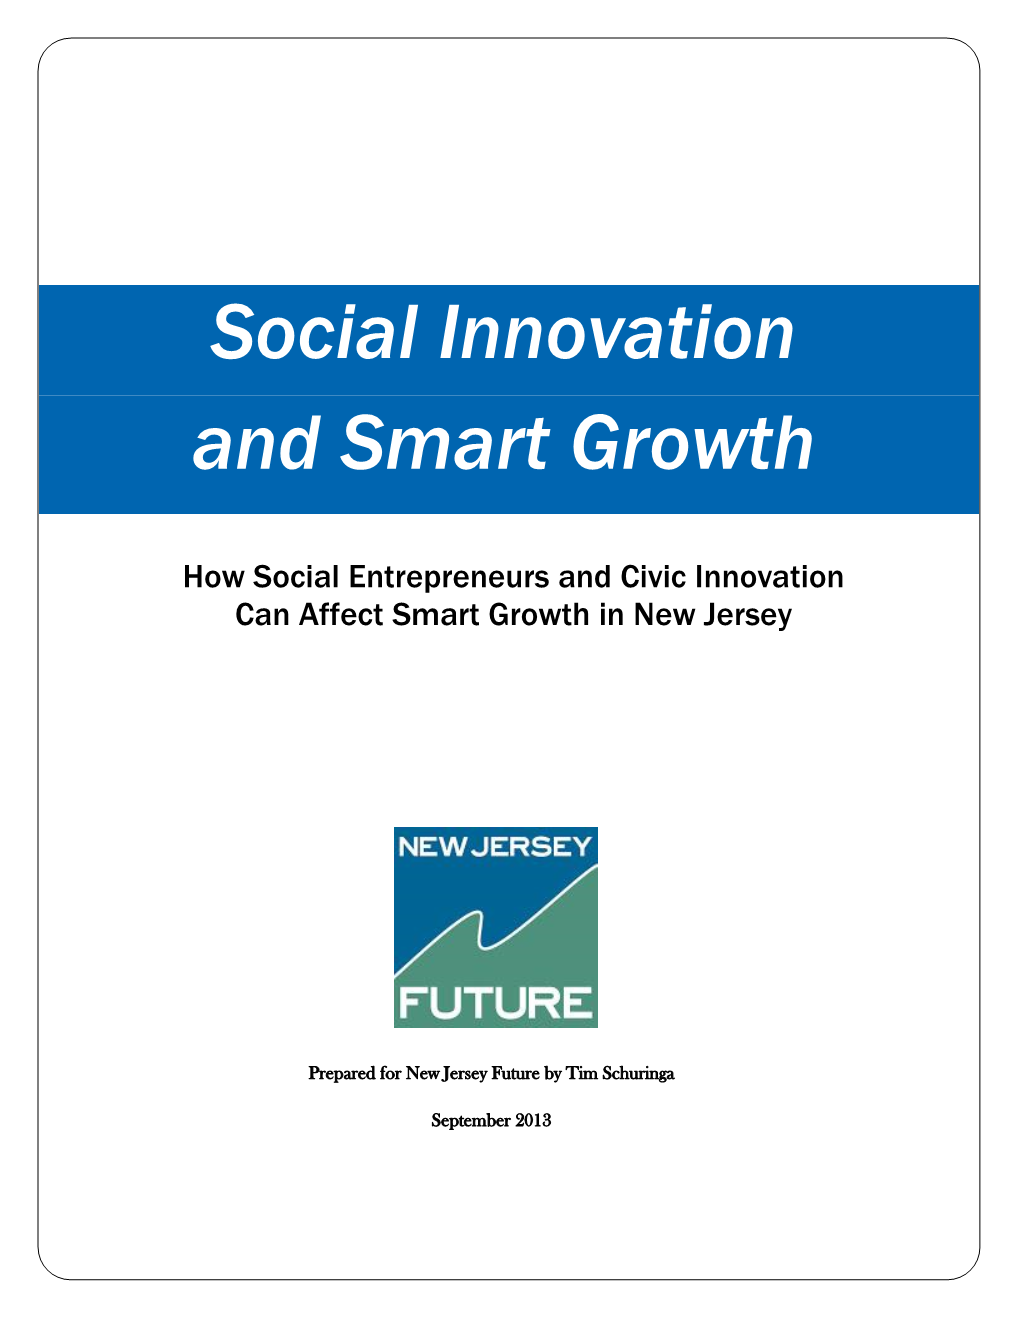 Social Innovation and Smart Growth 9-13